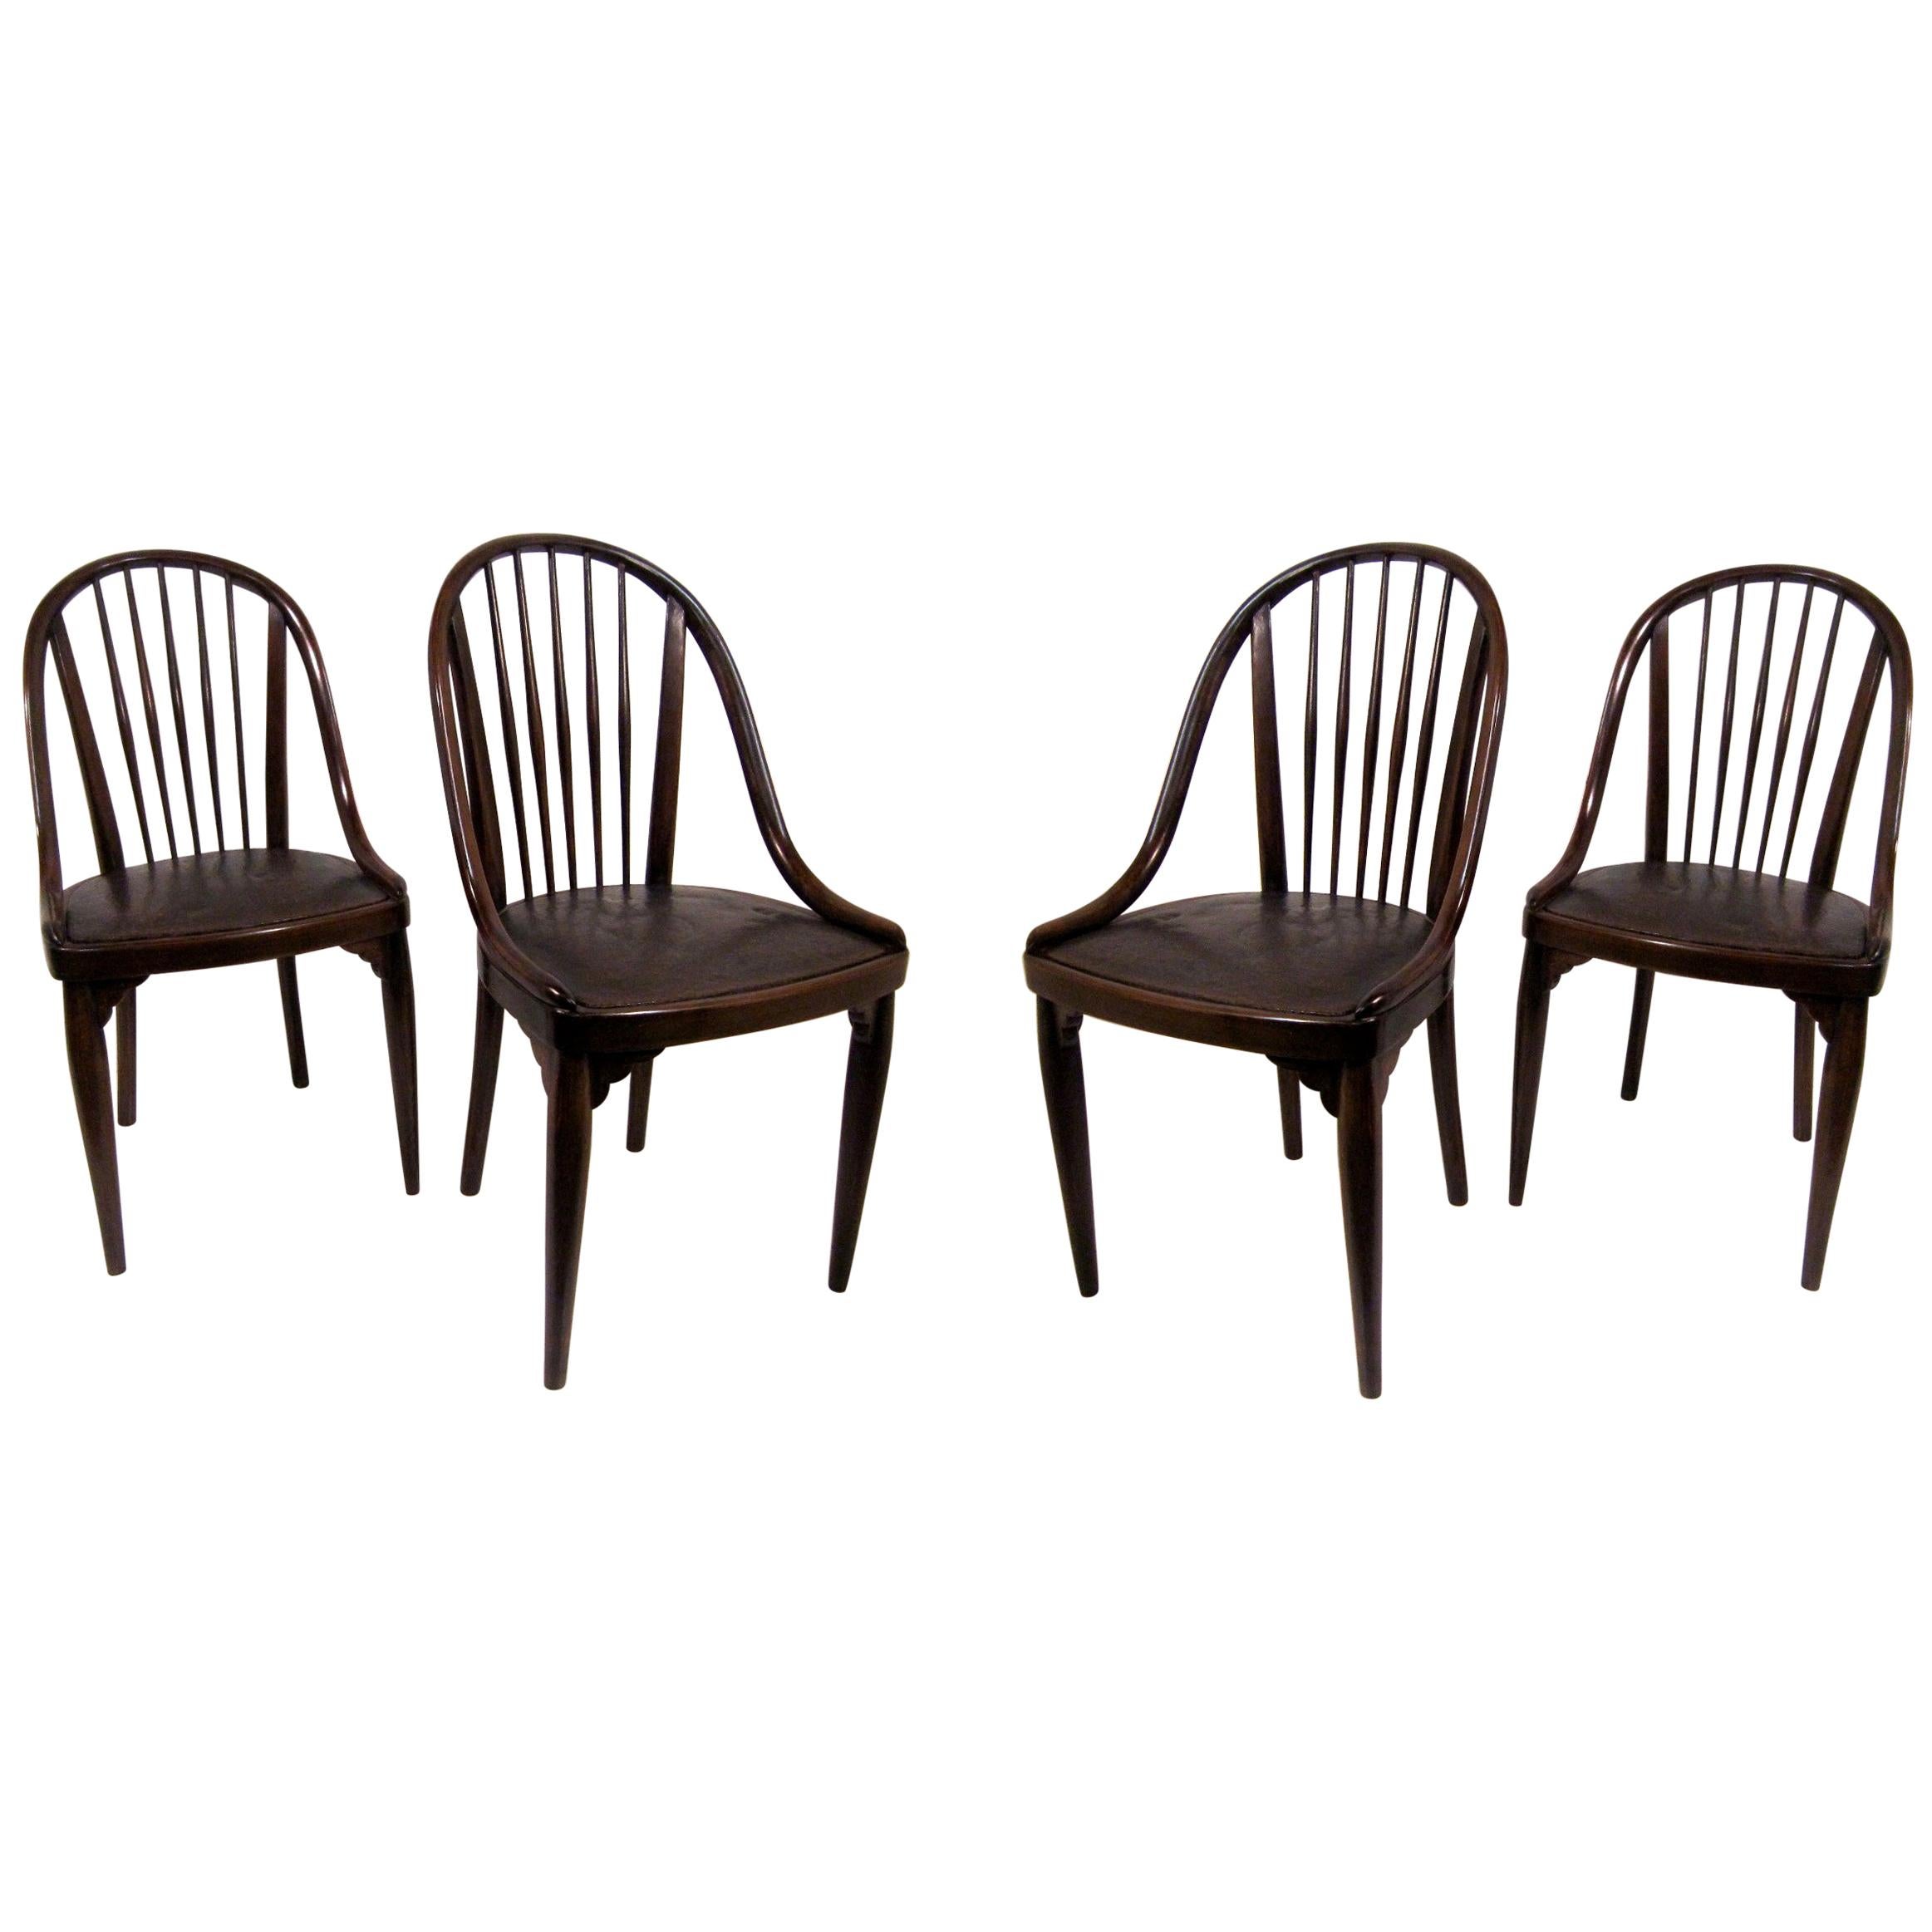 Set of Four Original Beechwood Chairs by Thonet